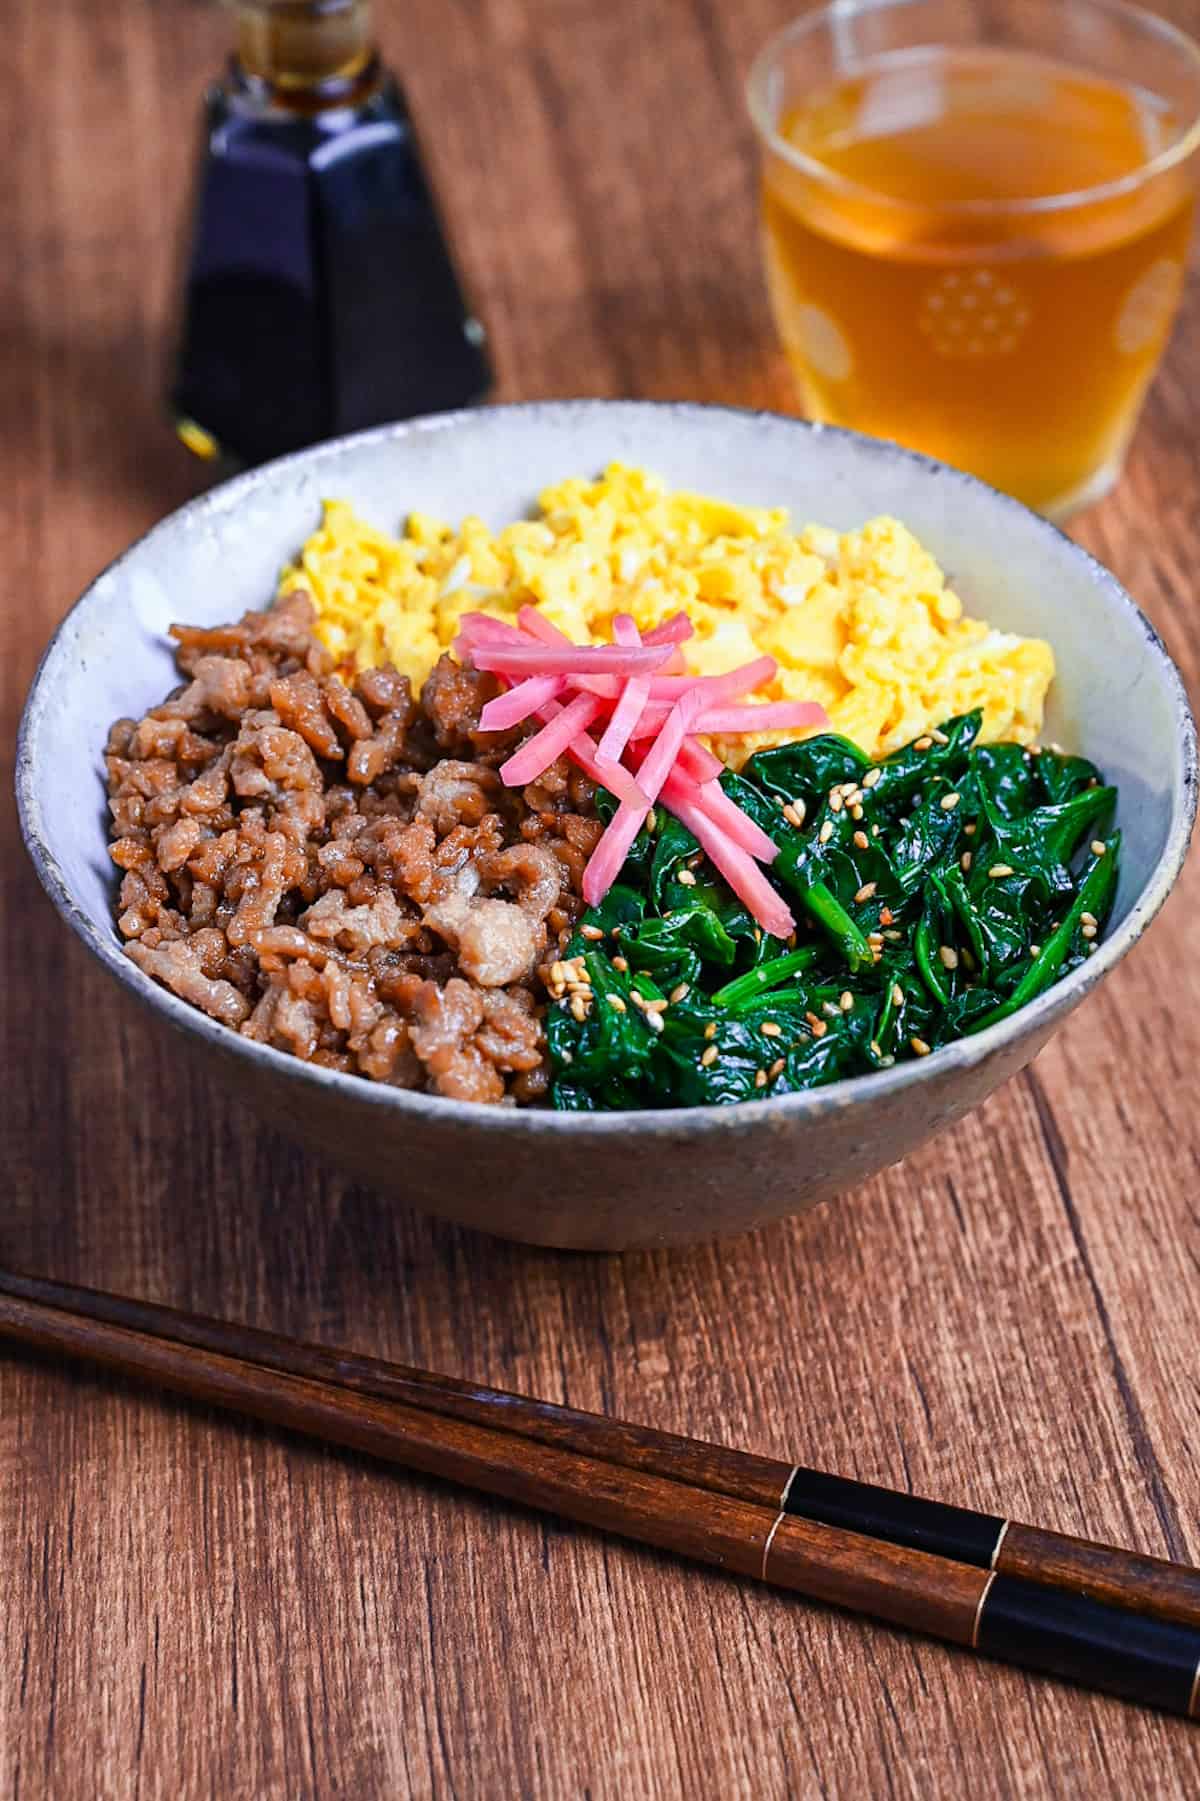 sanshoku don made with chicken soboro, scrambled egg and blanched spinach served over rice and topped with red pickled ginger on a wooden background